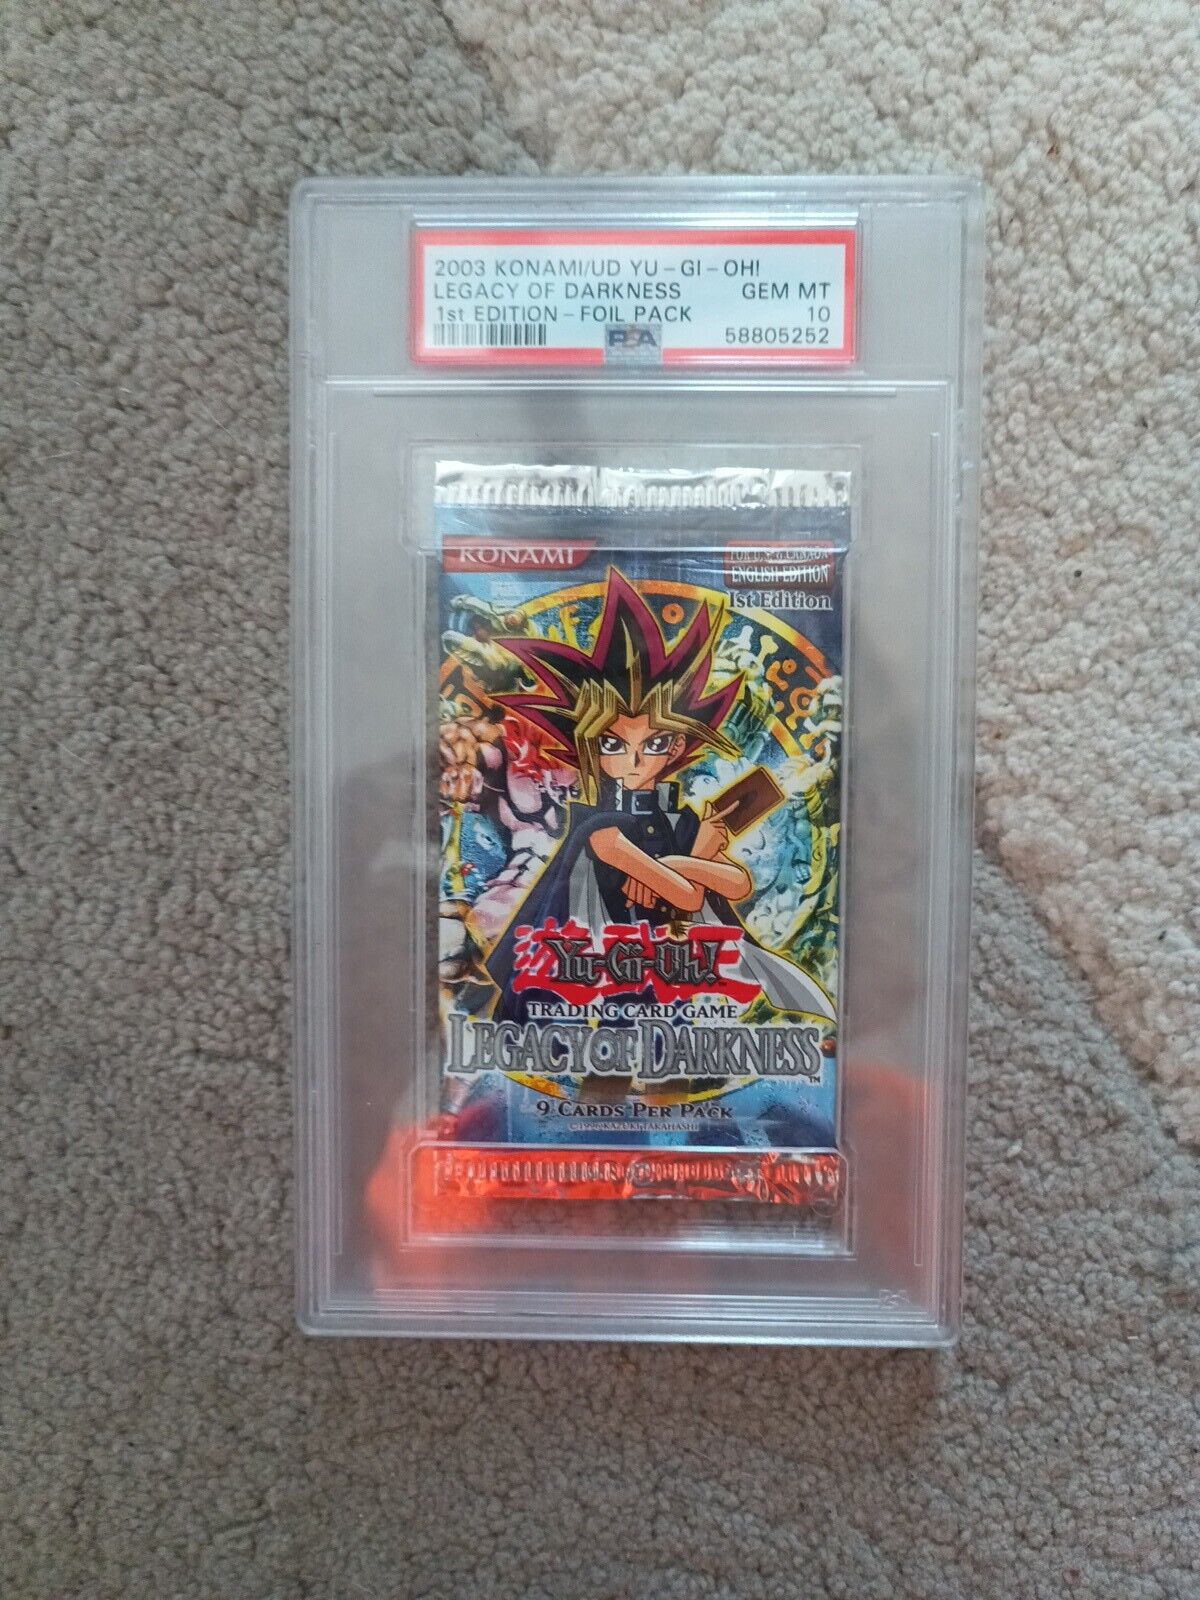 YU-GI-OH LEGACY OF DARKNESS 1ST ED FOIL PACK PSA 10